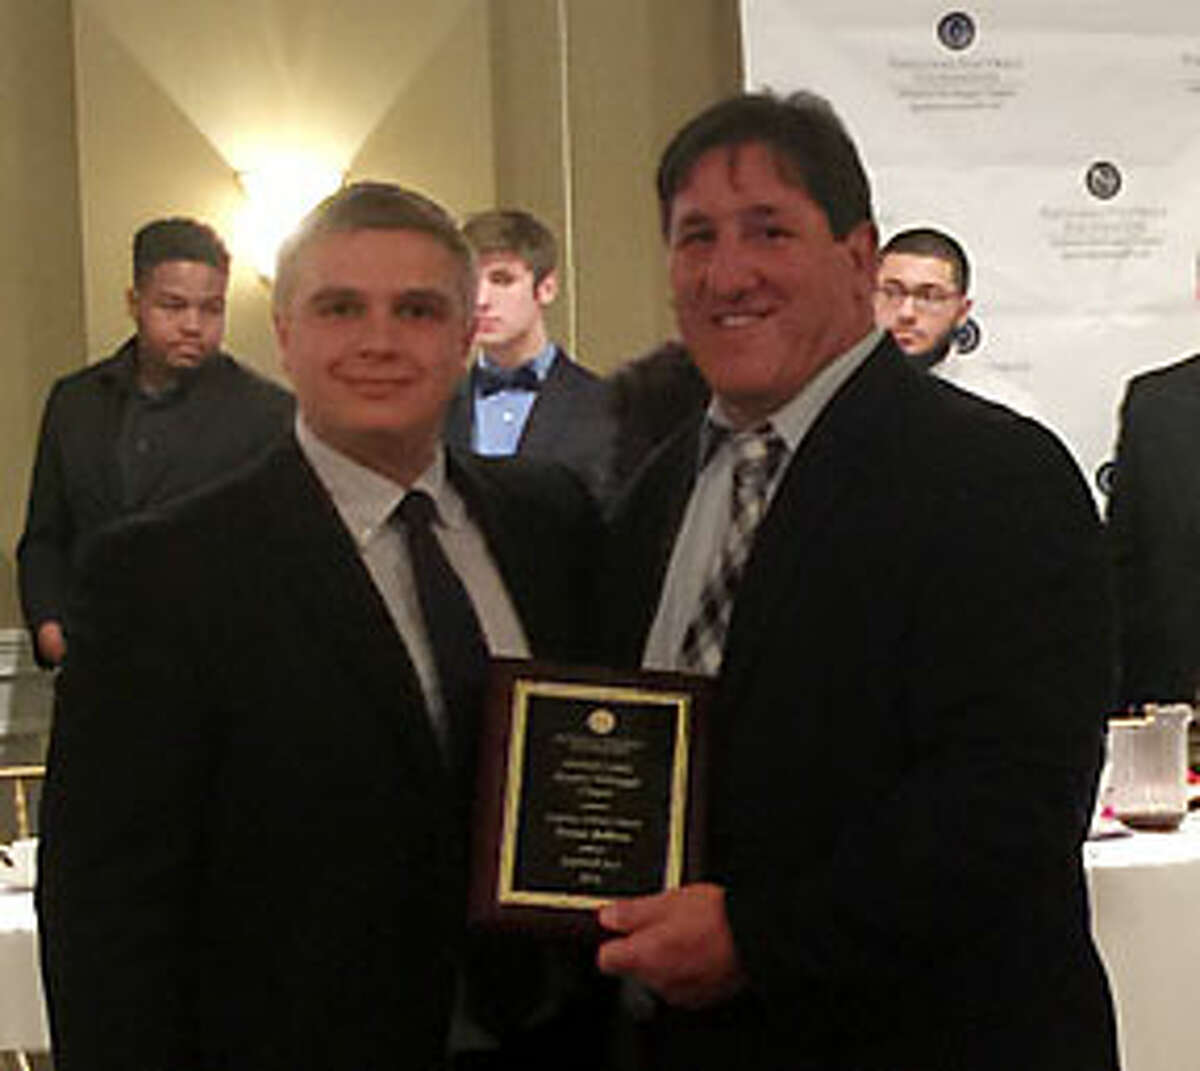 Trevor Bellows is presented with the National Football Foundation Scholar Athlete Award by John Barbarotta the Fairfield County Chapter president.